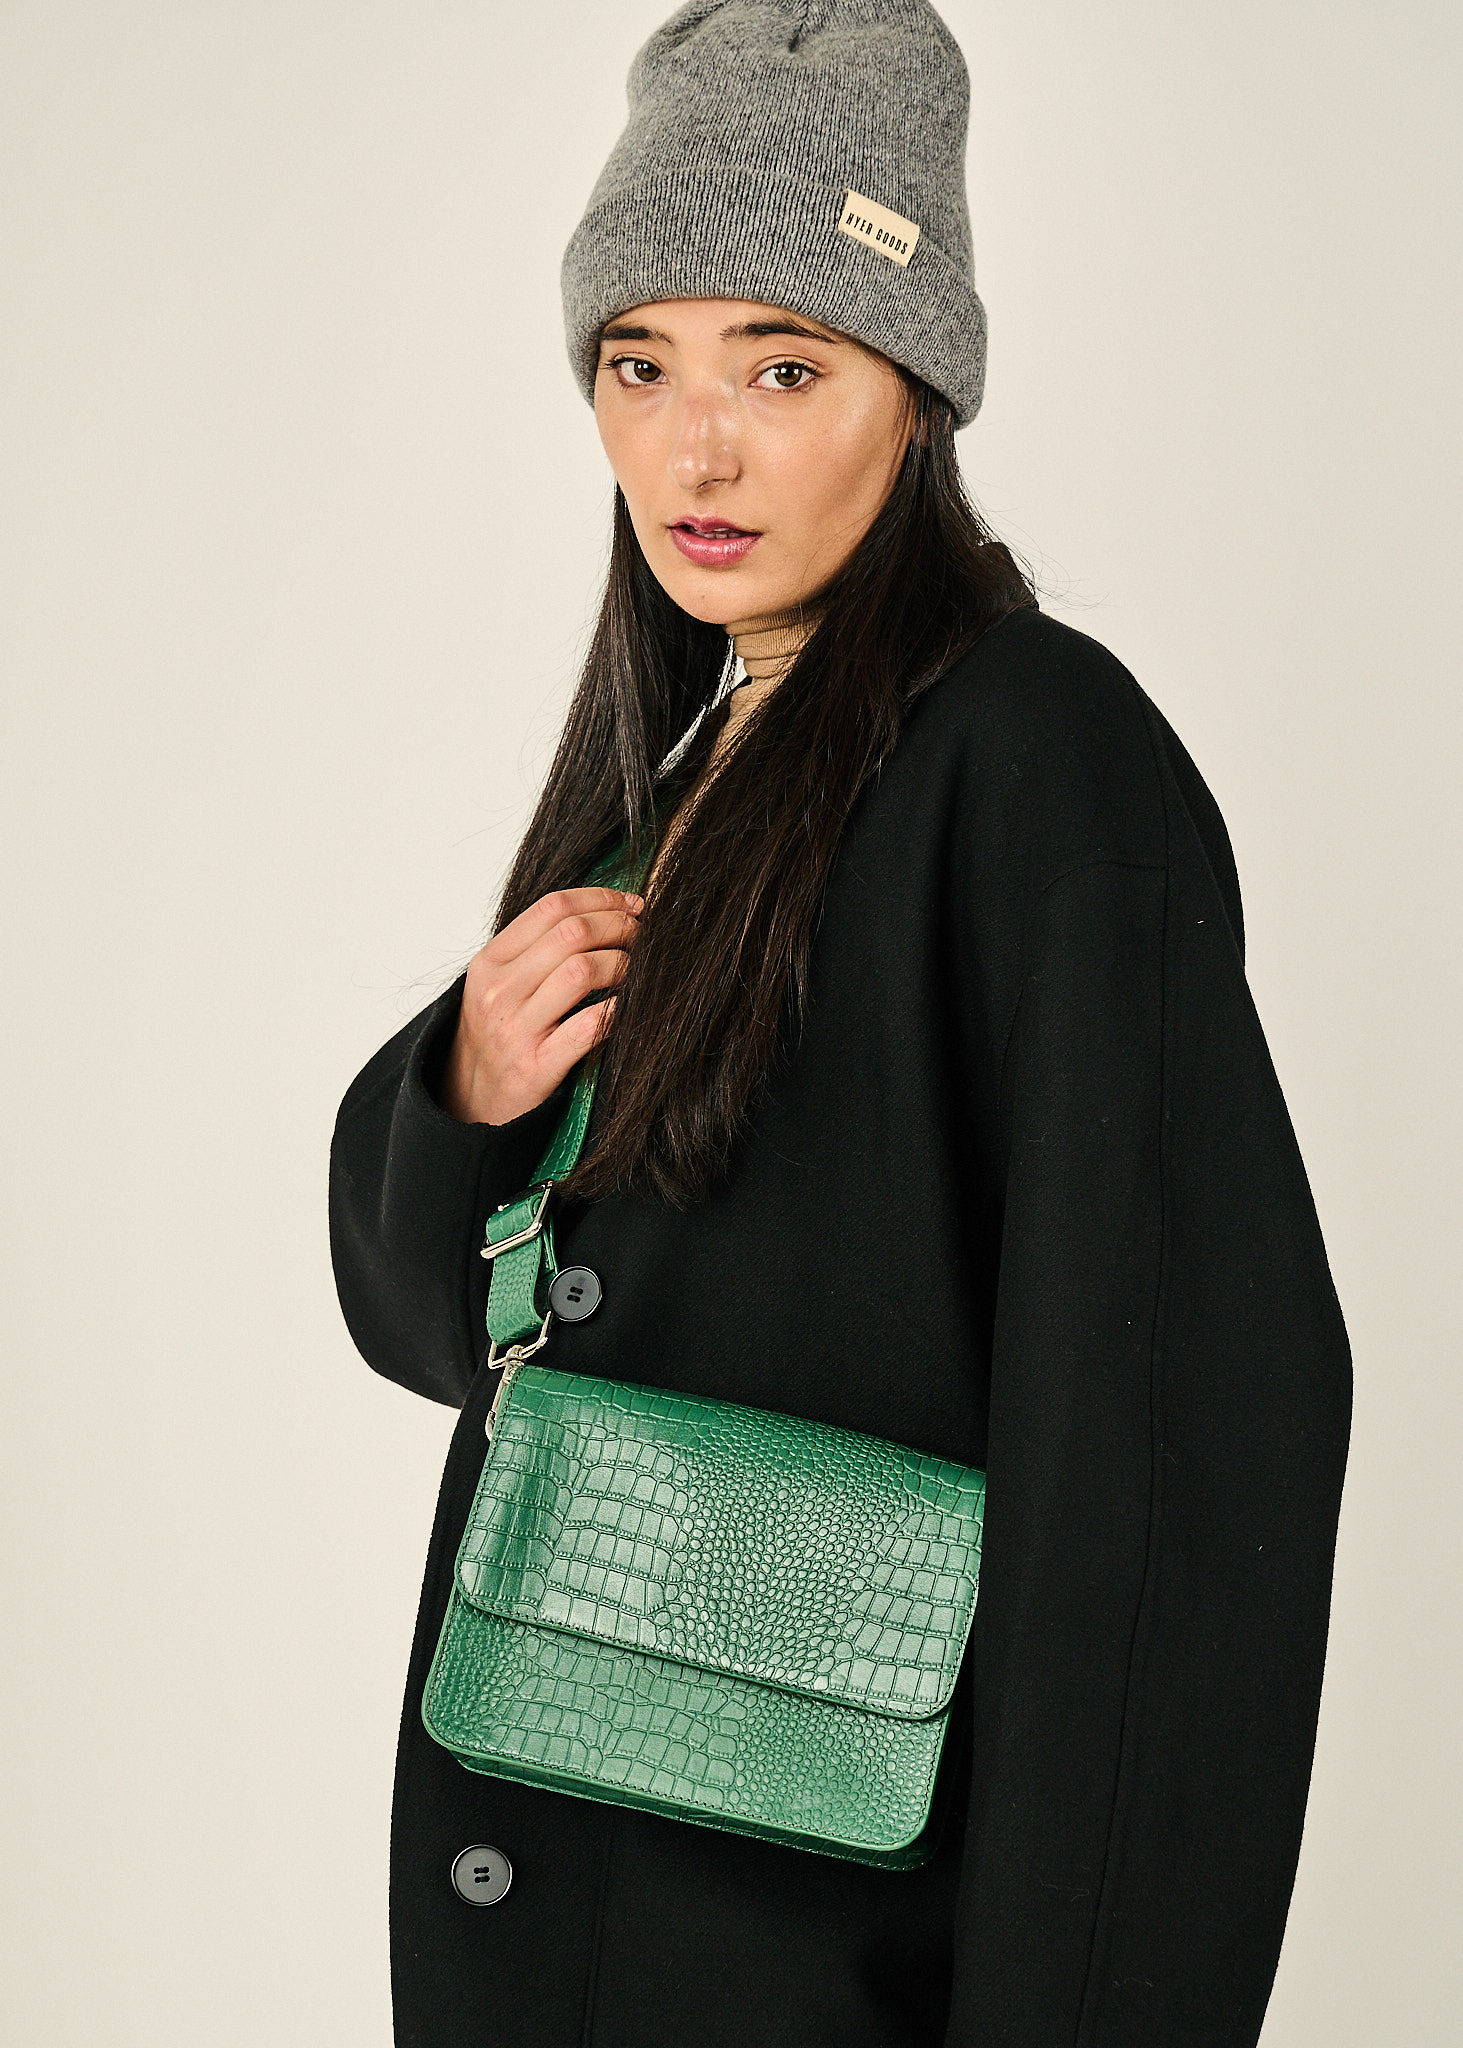 a 3/4 view of a girl wearing a grey wool beanie, a black coat and a bright green crocodile crossbody purse